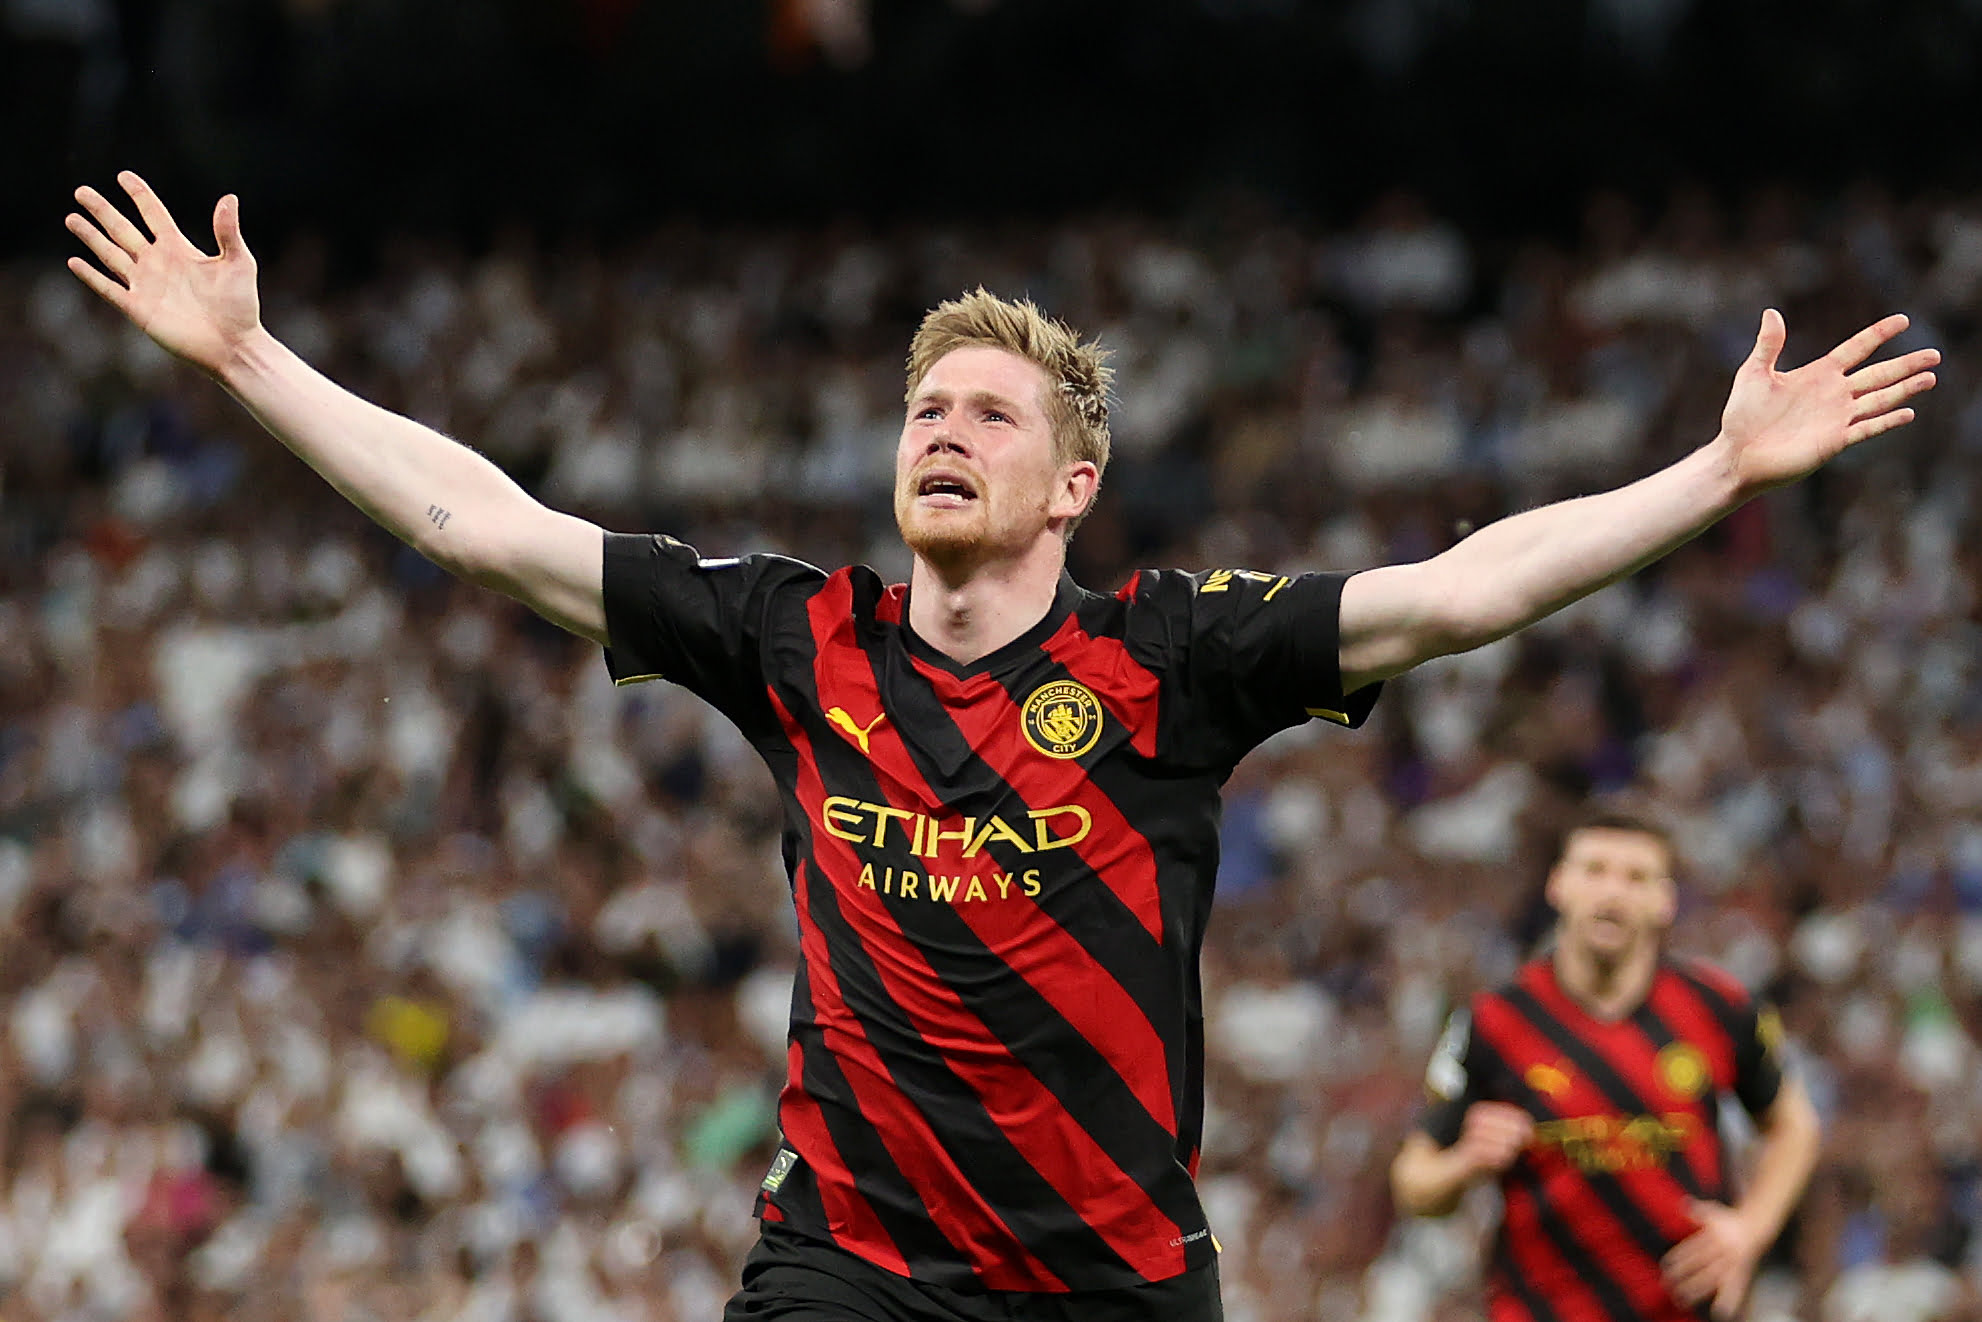 MADRID, SPAIN - MAY 09: Kevin De Bruyne of Manchester City celebrates after scoring the team's first goal during the UEFA Champions League semi-final first leg match between Real Madrid and Manchester City FC at Estadio Santiago Bernabeu on May 09, 2023 in Madrid, Spain. (Photo by Julian Finney/Getty Images)